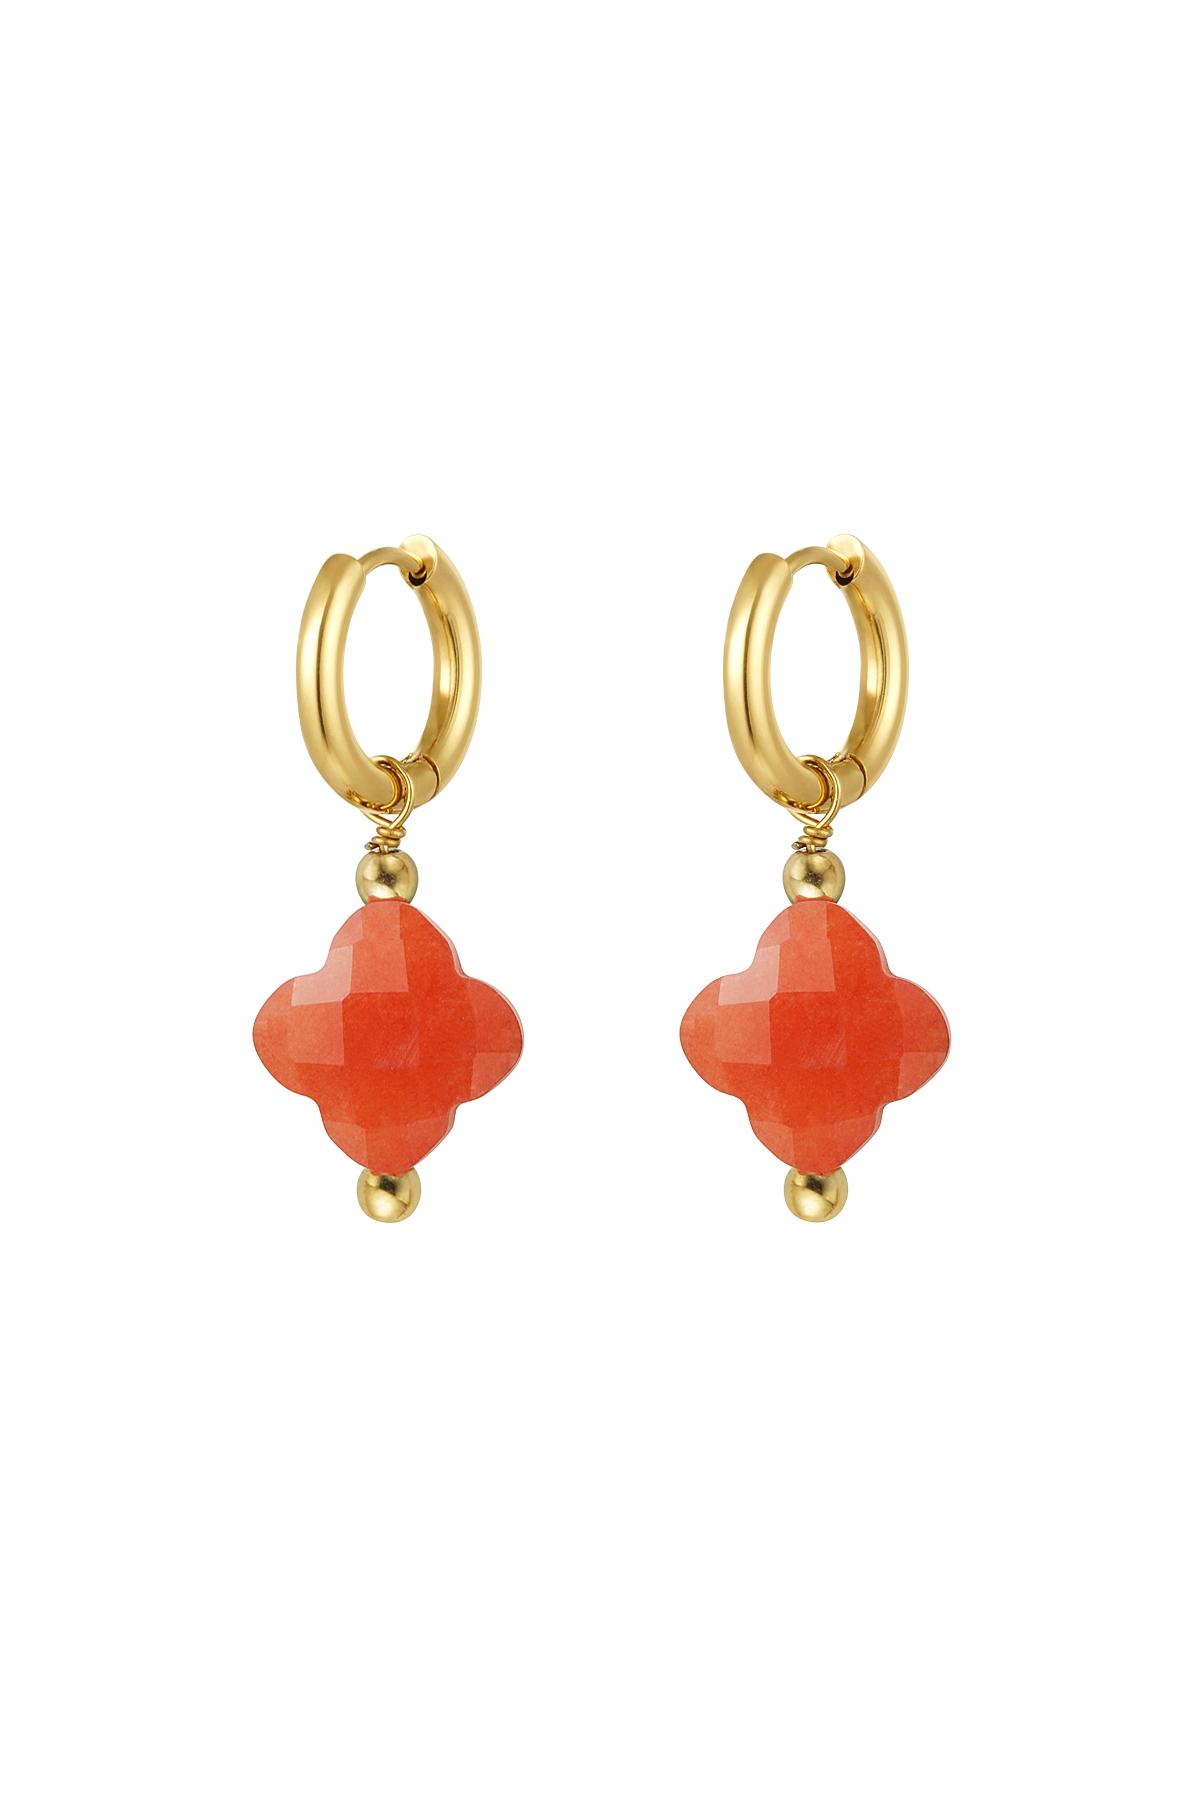 Earrings clover color - Natural stones collection Orange & Gold Stainless Steel h5 